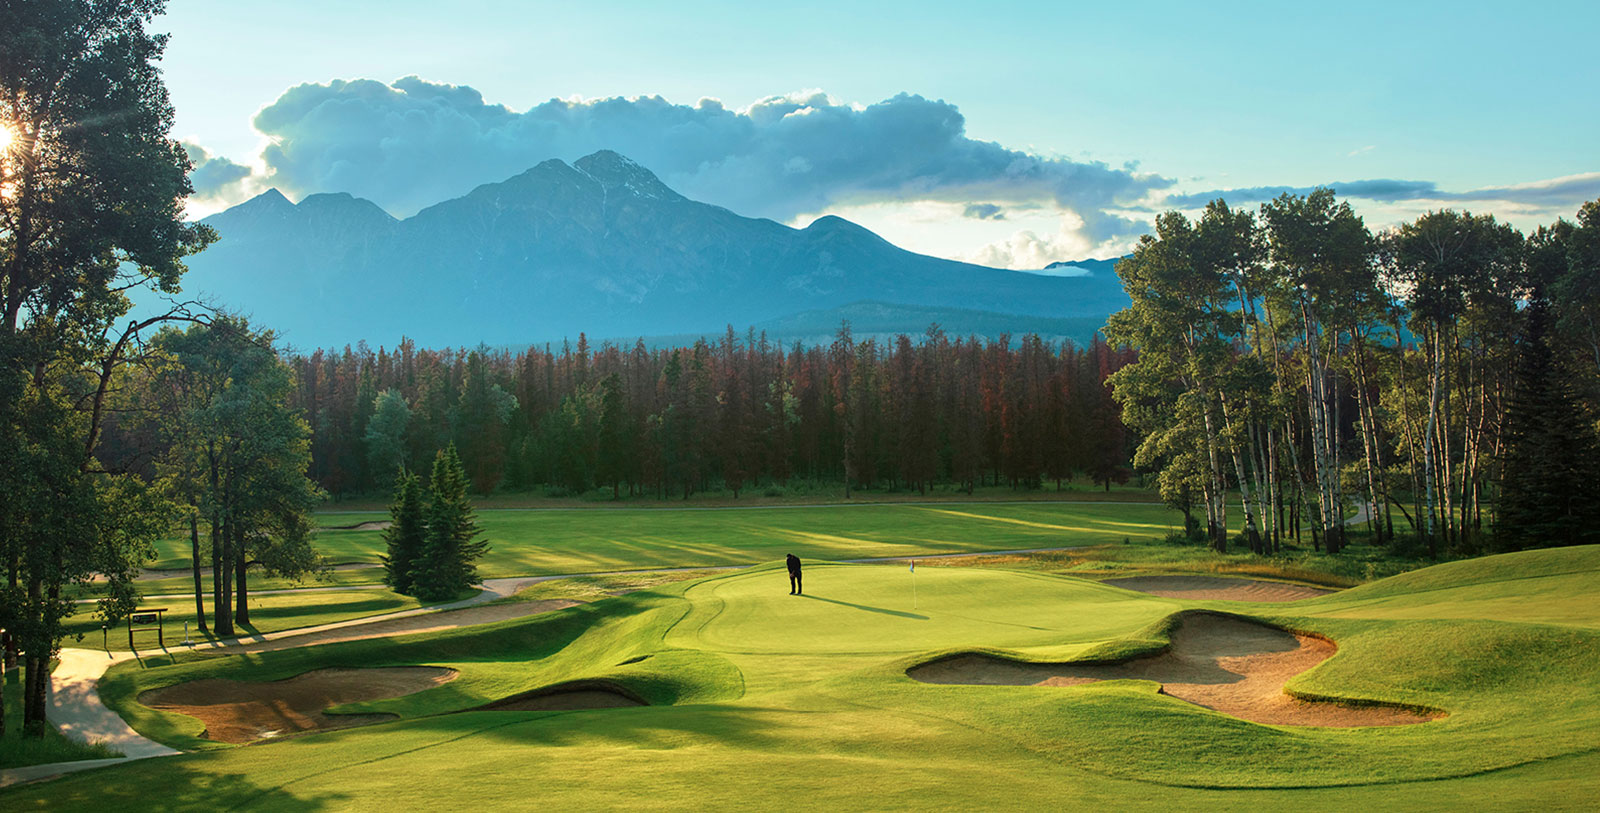 Experience a round of golf in the middle of the Canadian Rockies.